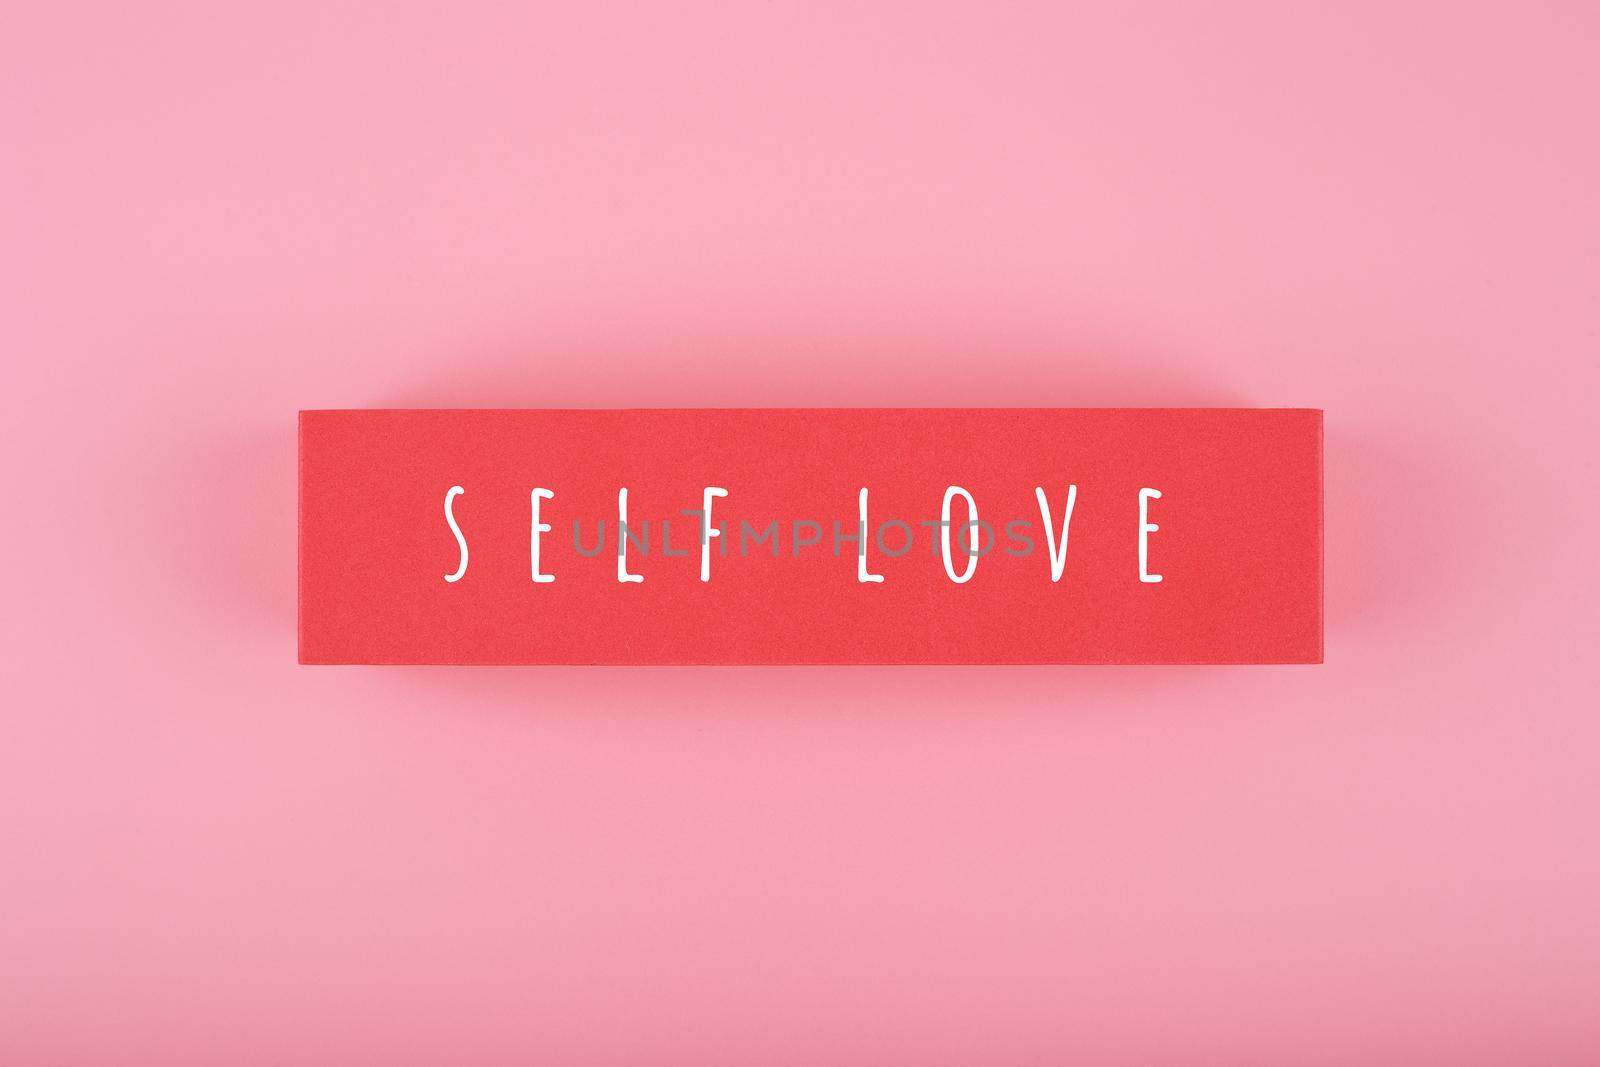 Self love minimal creative concept in pink colors against pink background with copy space by Senorina_Irina